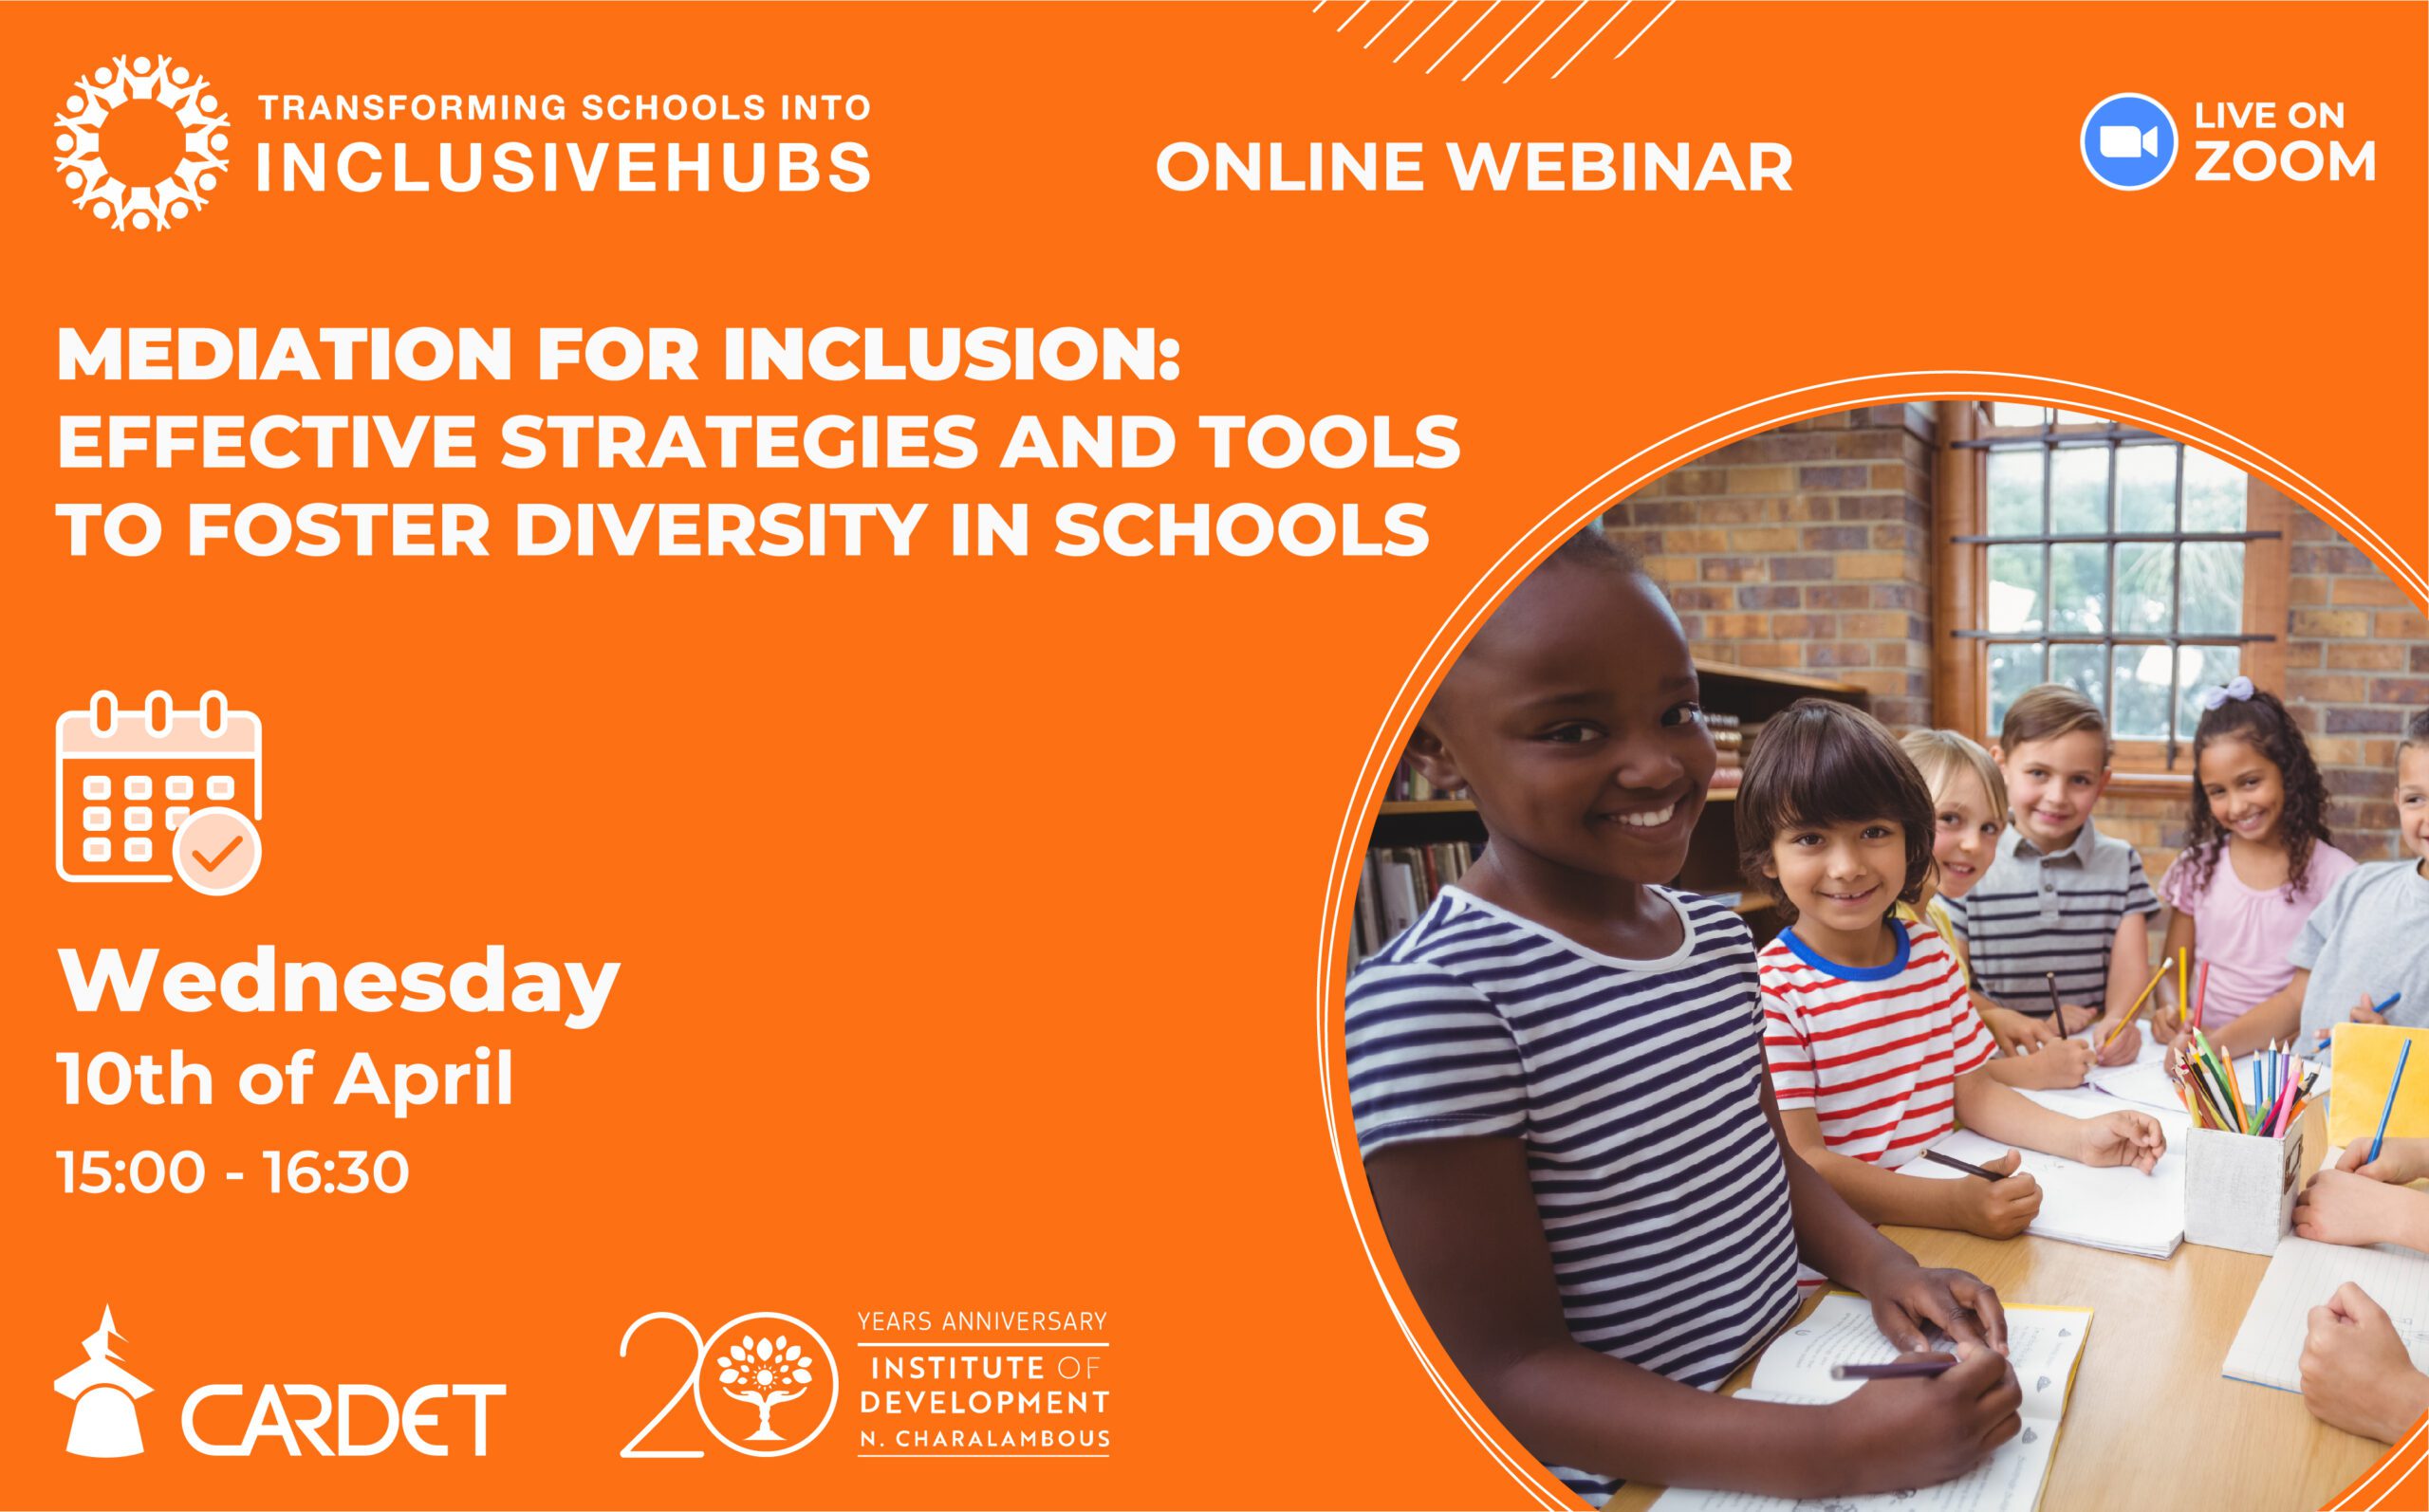 Webinar "Mediation for Inclusion: Effective Strategies and Tools to Foster Diversity in Schools"